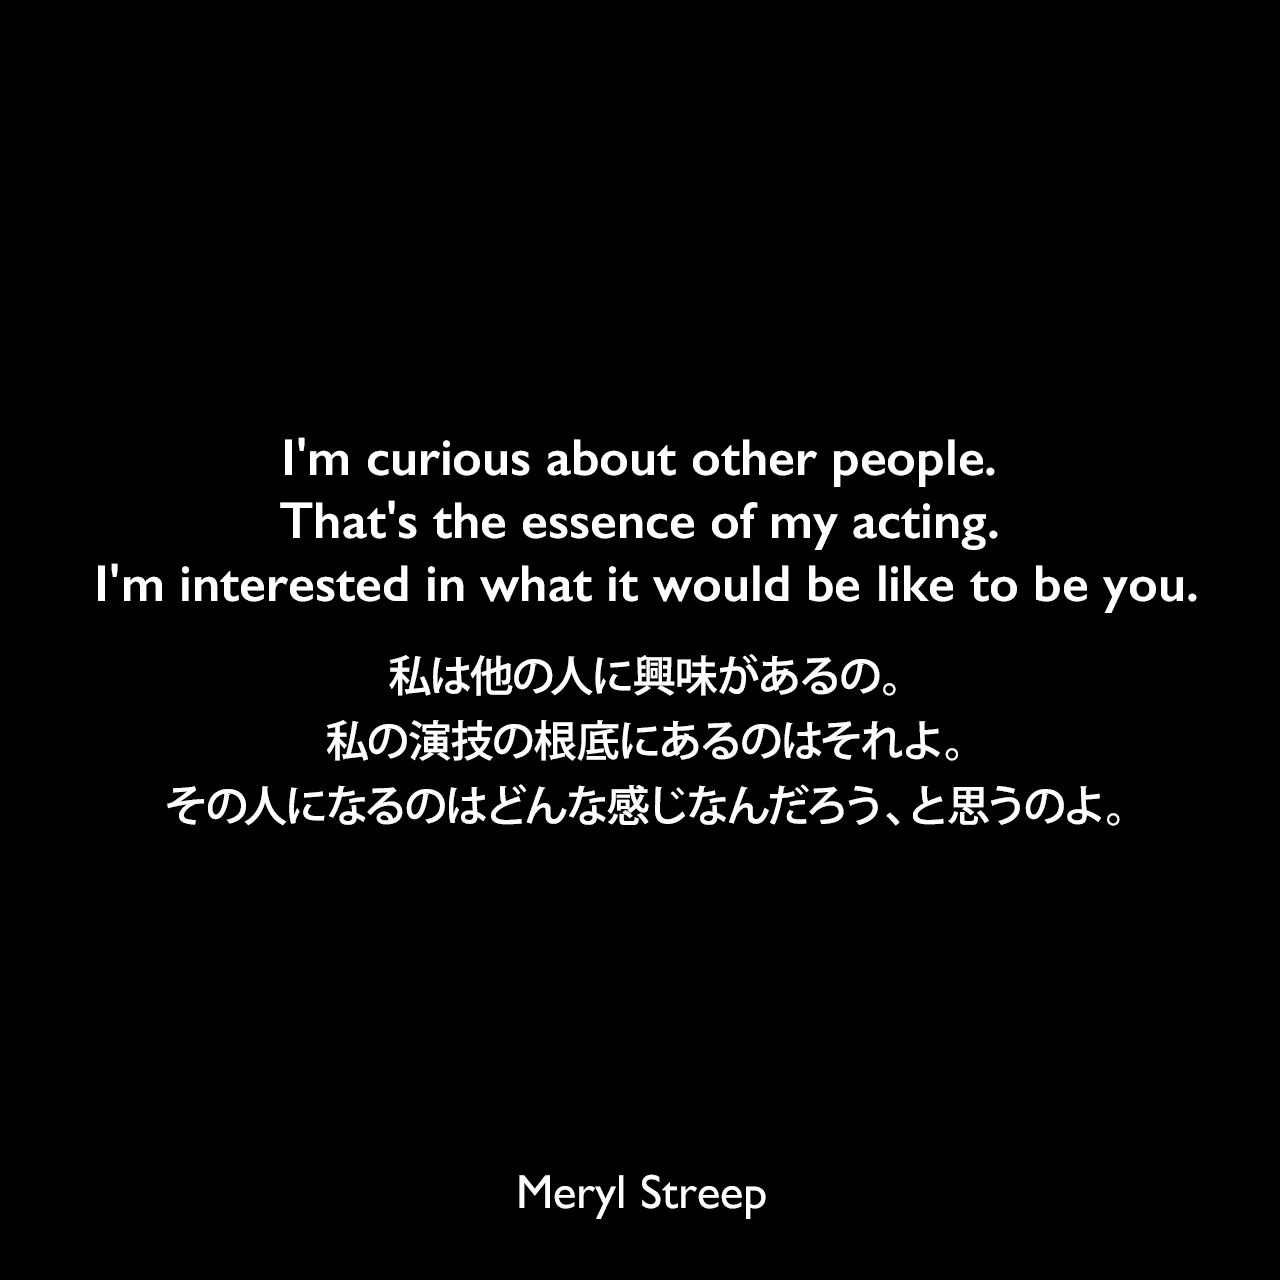 I'm curious about other people. That's the essence of my acting. I'm interested in what it would be like to be you.私は他の人に興味があるの。私の演技の根底にあるのはそれよ。その人になるのはどんな感じなんだろう、と思うのよ。Meryl Streep